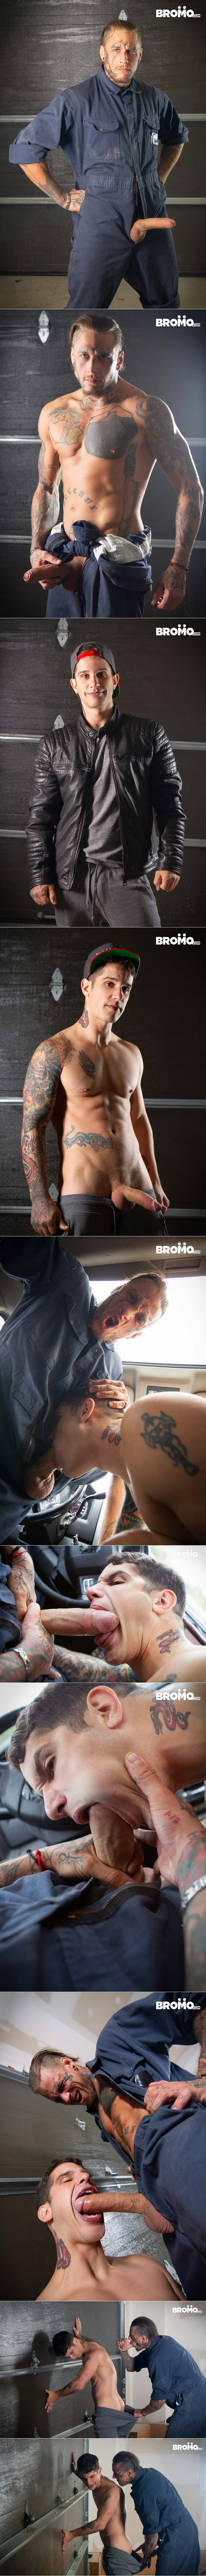 Raw Tow Service, Part One (Bo Sinn Fucks Pierre Fitch) at BROMO